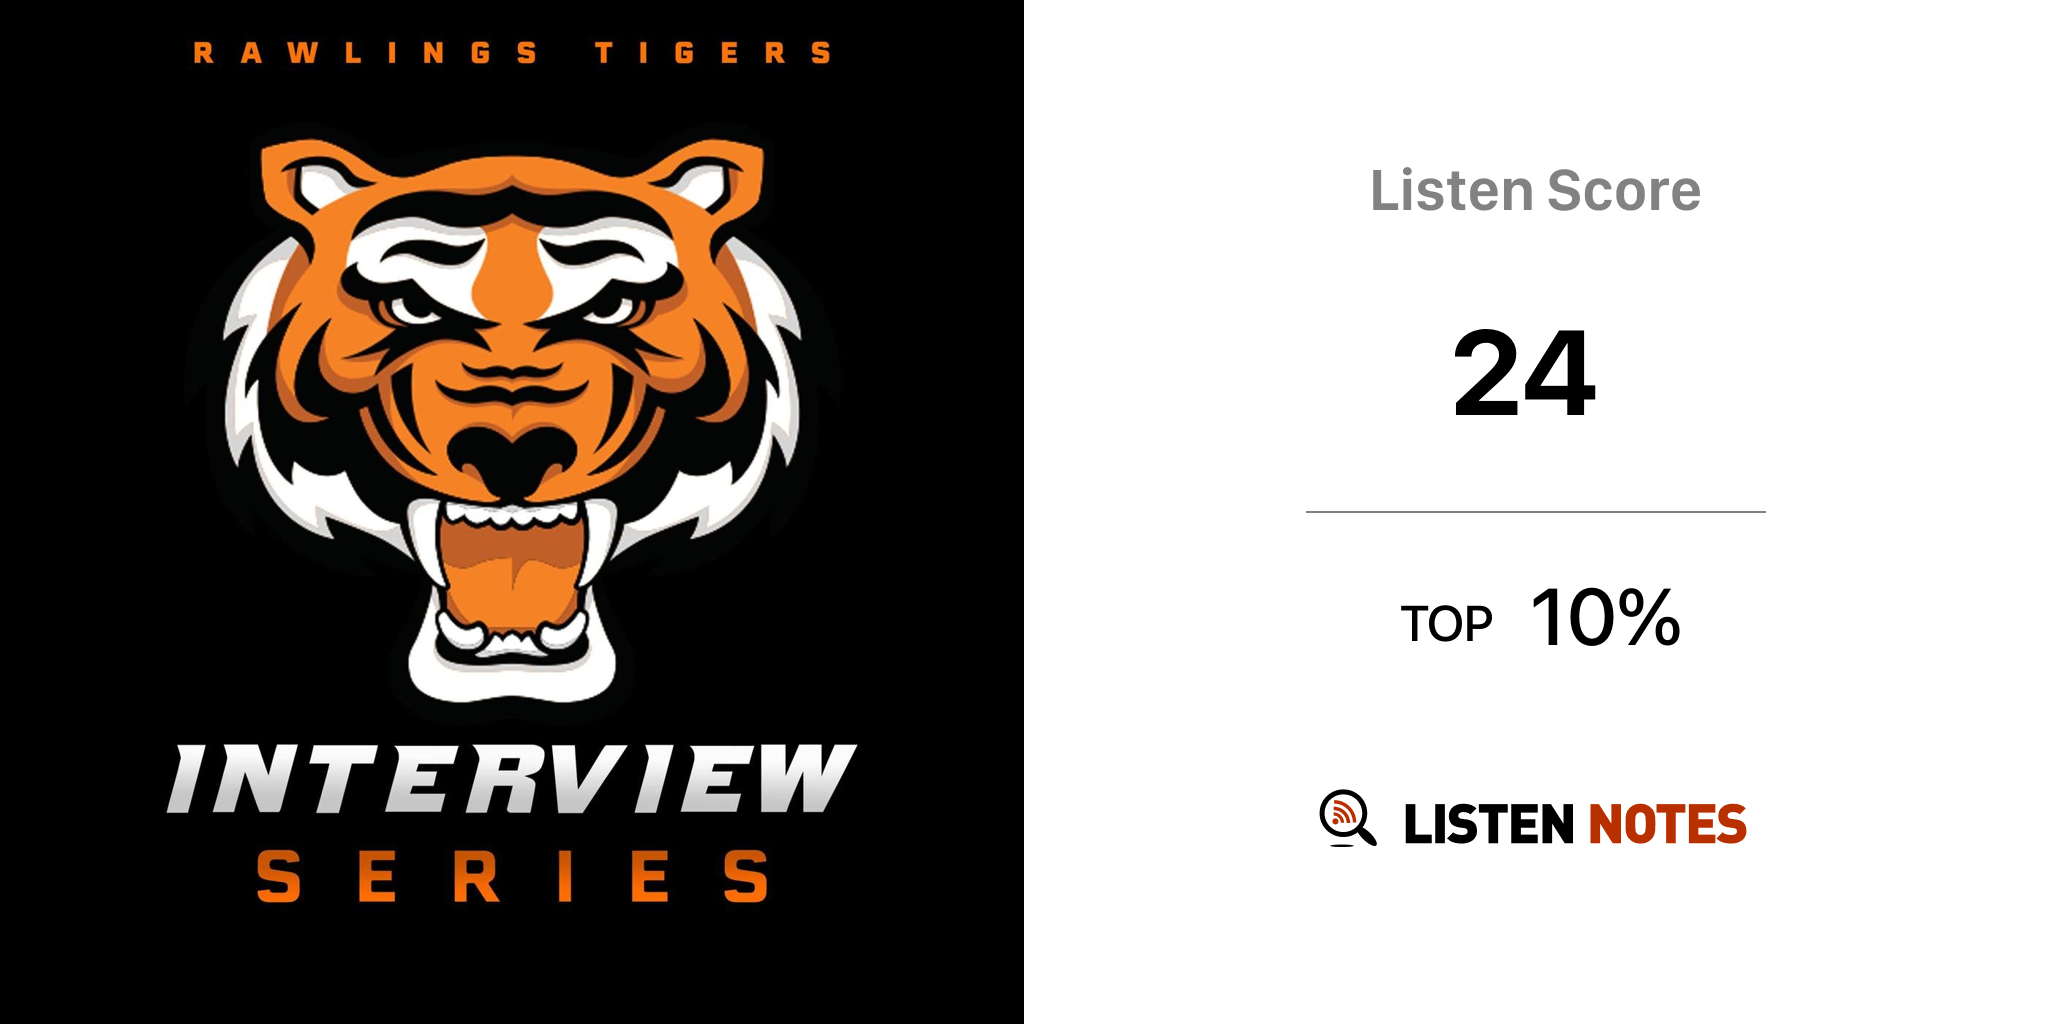 Rawlings Tigers Interview Series (podcast) - Rawlings Tigers